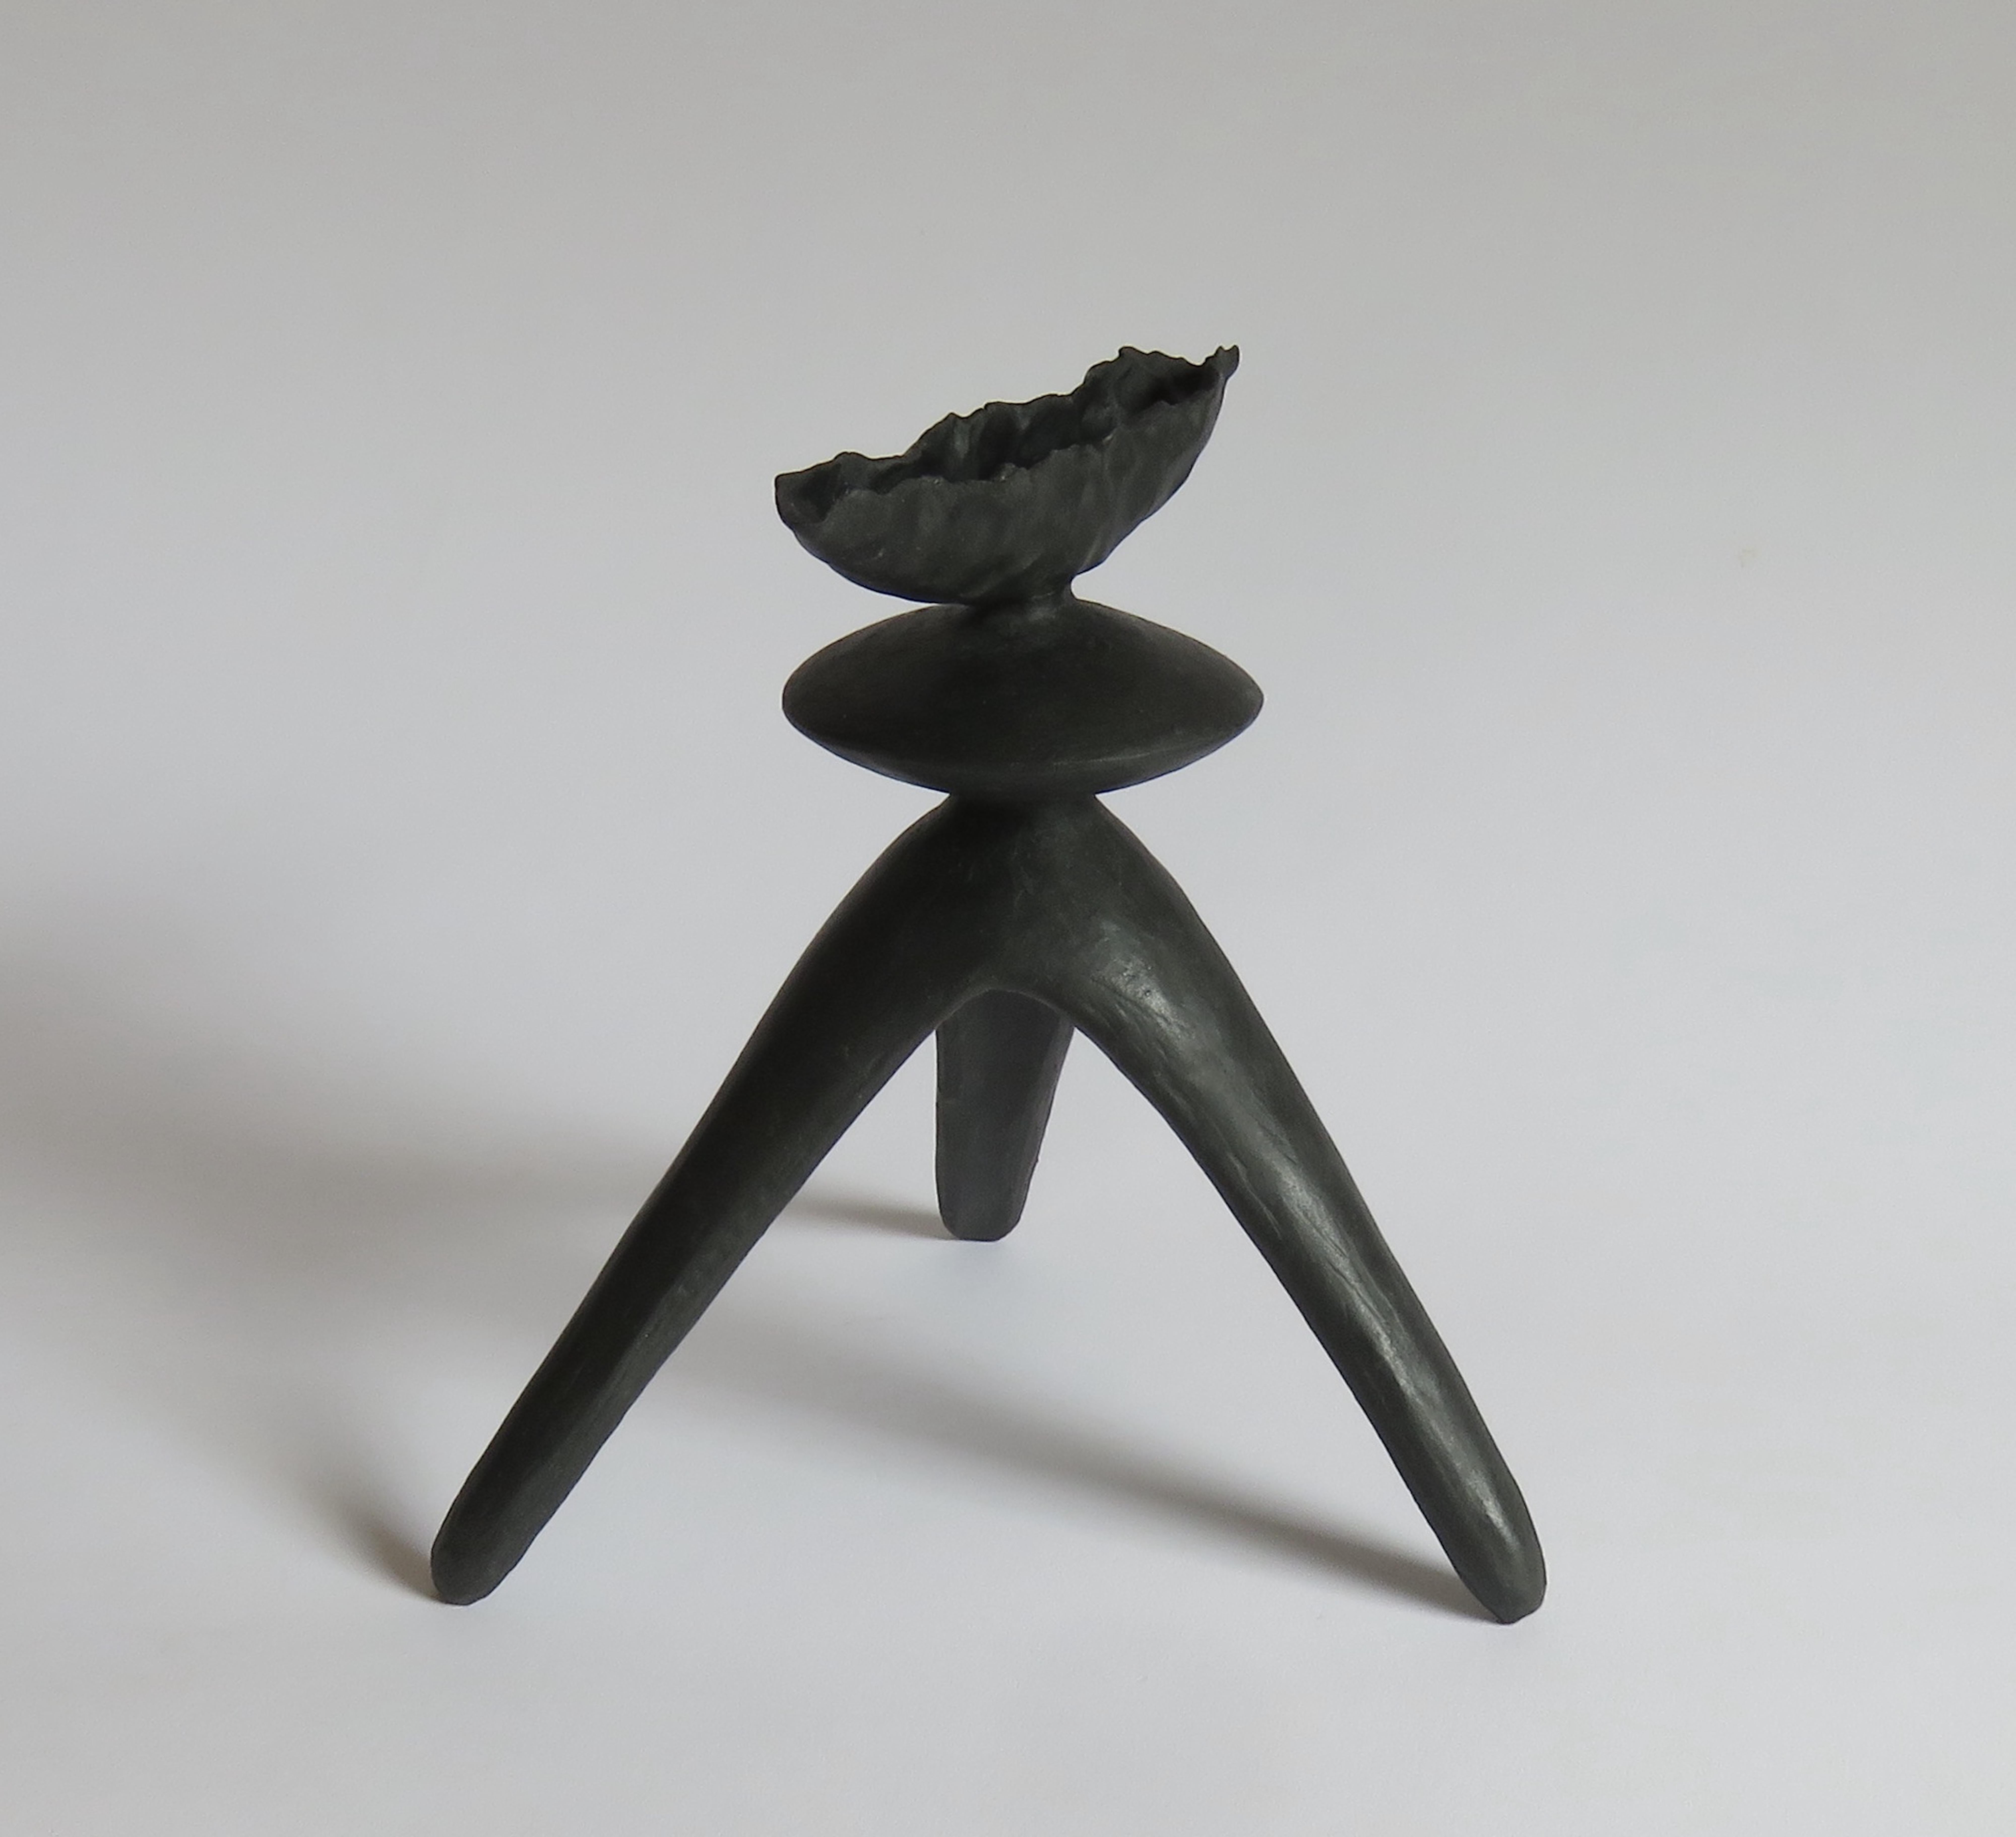 Organic Modern Crimped-Top Black Ceramic TOTEM with Middle Sphere on Tripod Legs, Hand Built